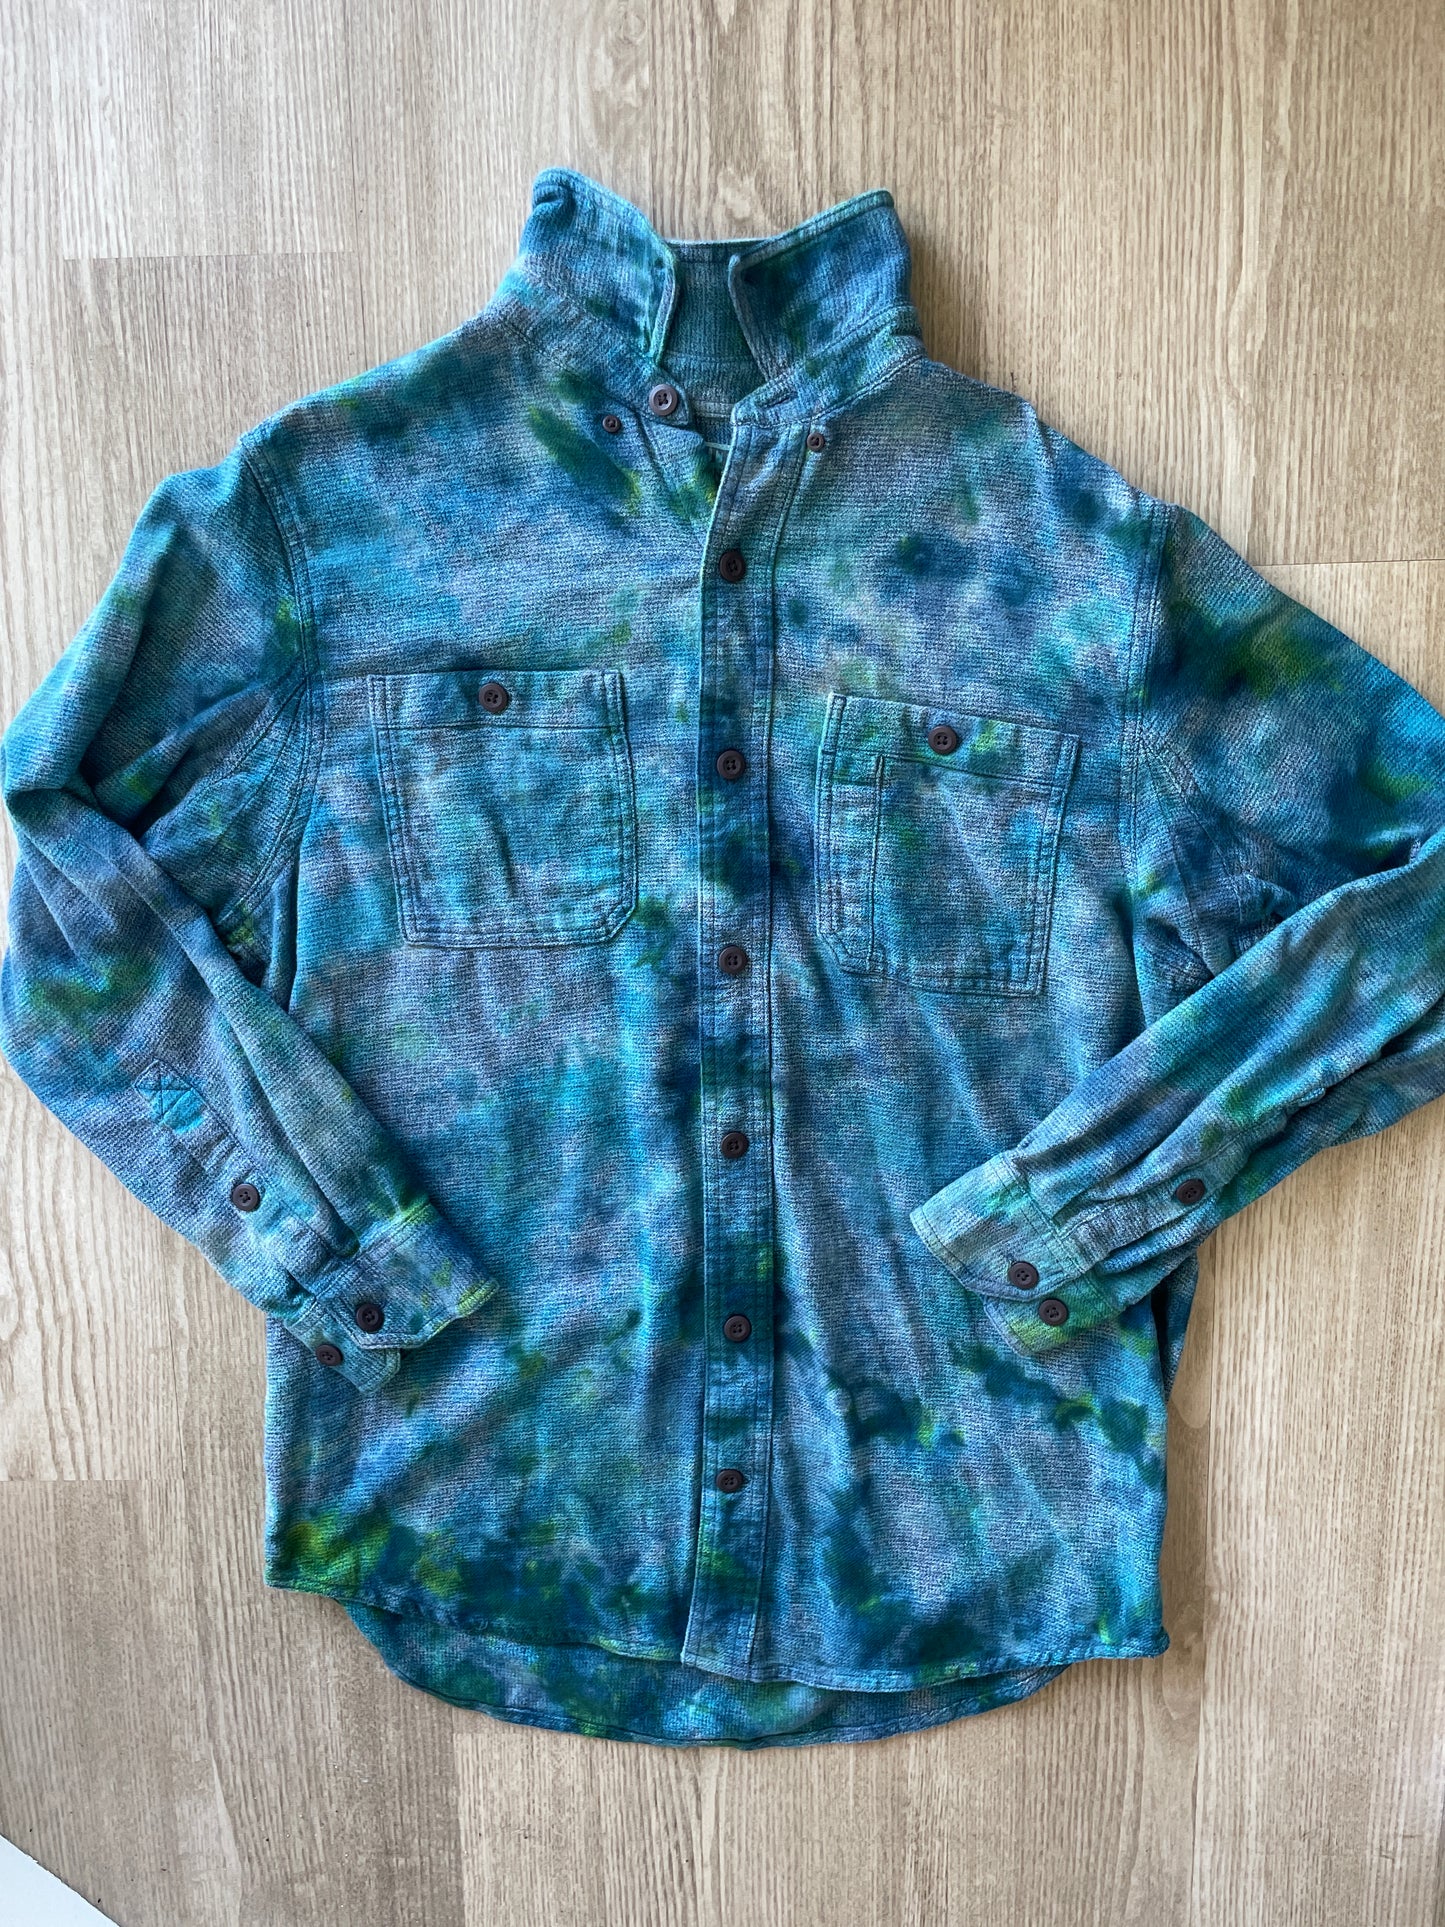 LARGE Men’s Duluth Trading Co Blue and Green Handmade Tie Dye Flannel Shirt | One-Of-a-Kind Upcycled Long Sleeve